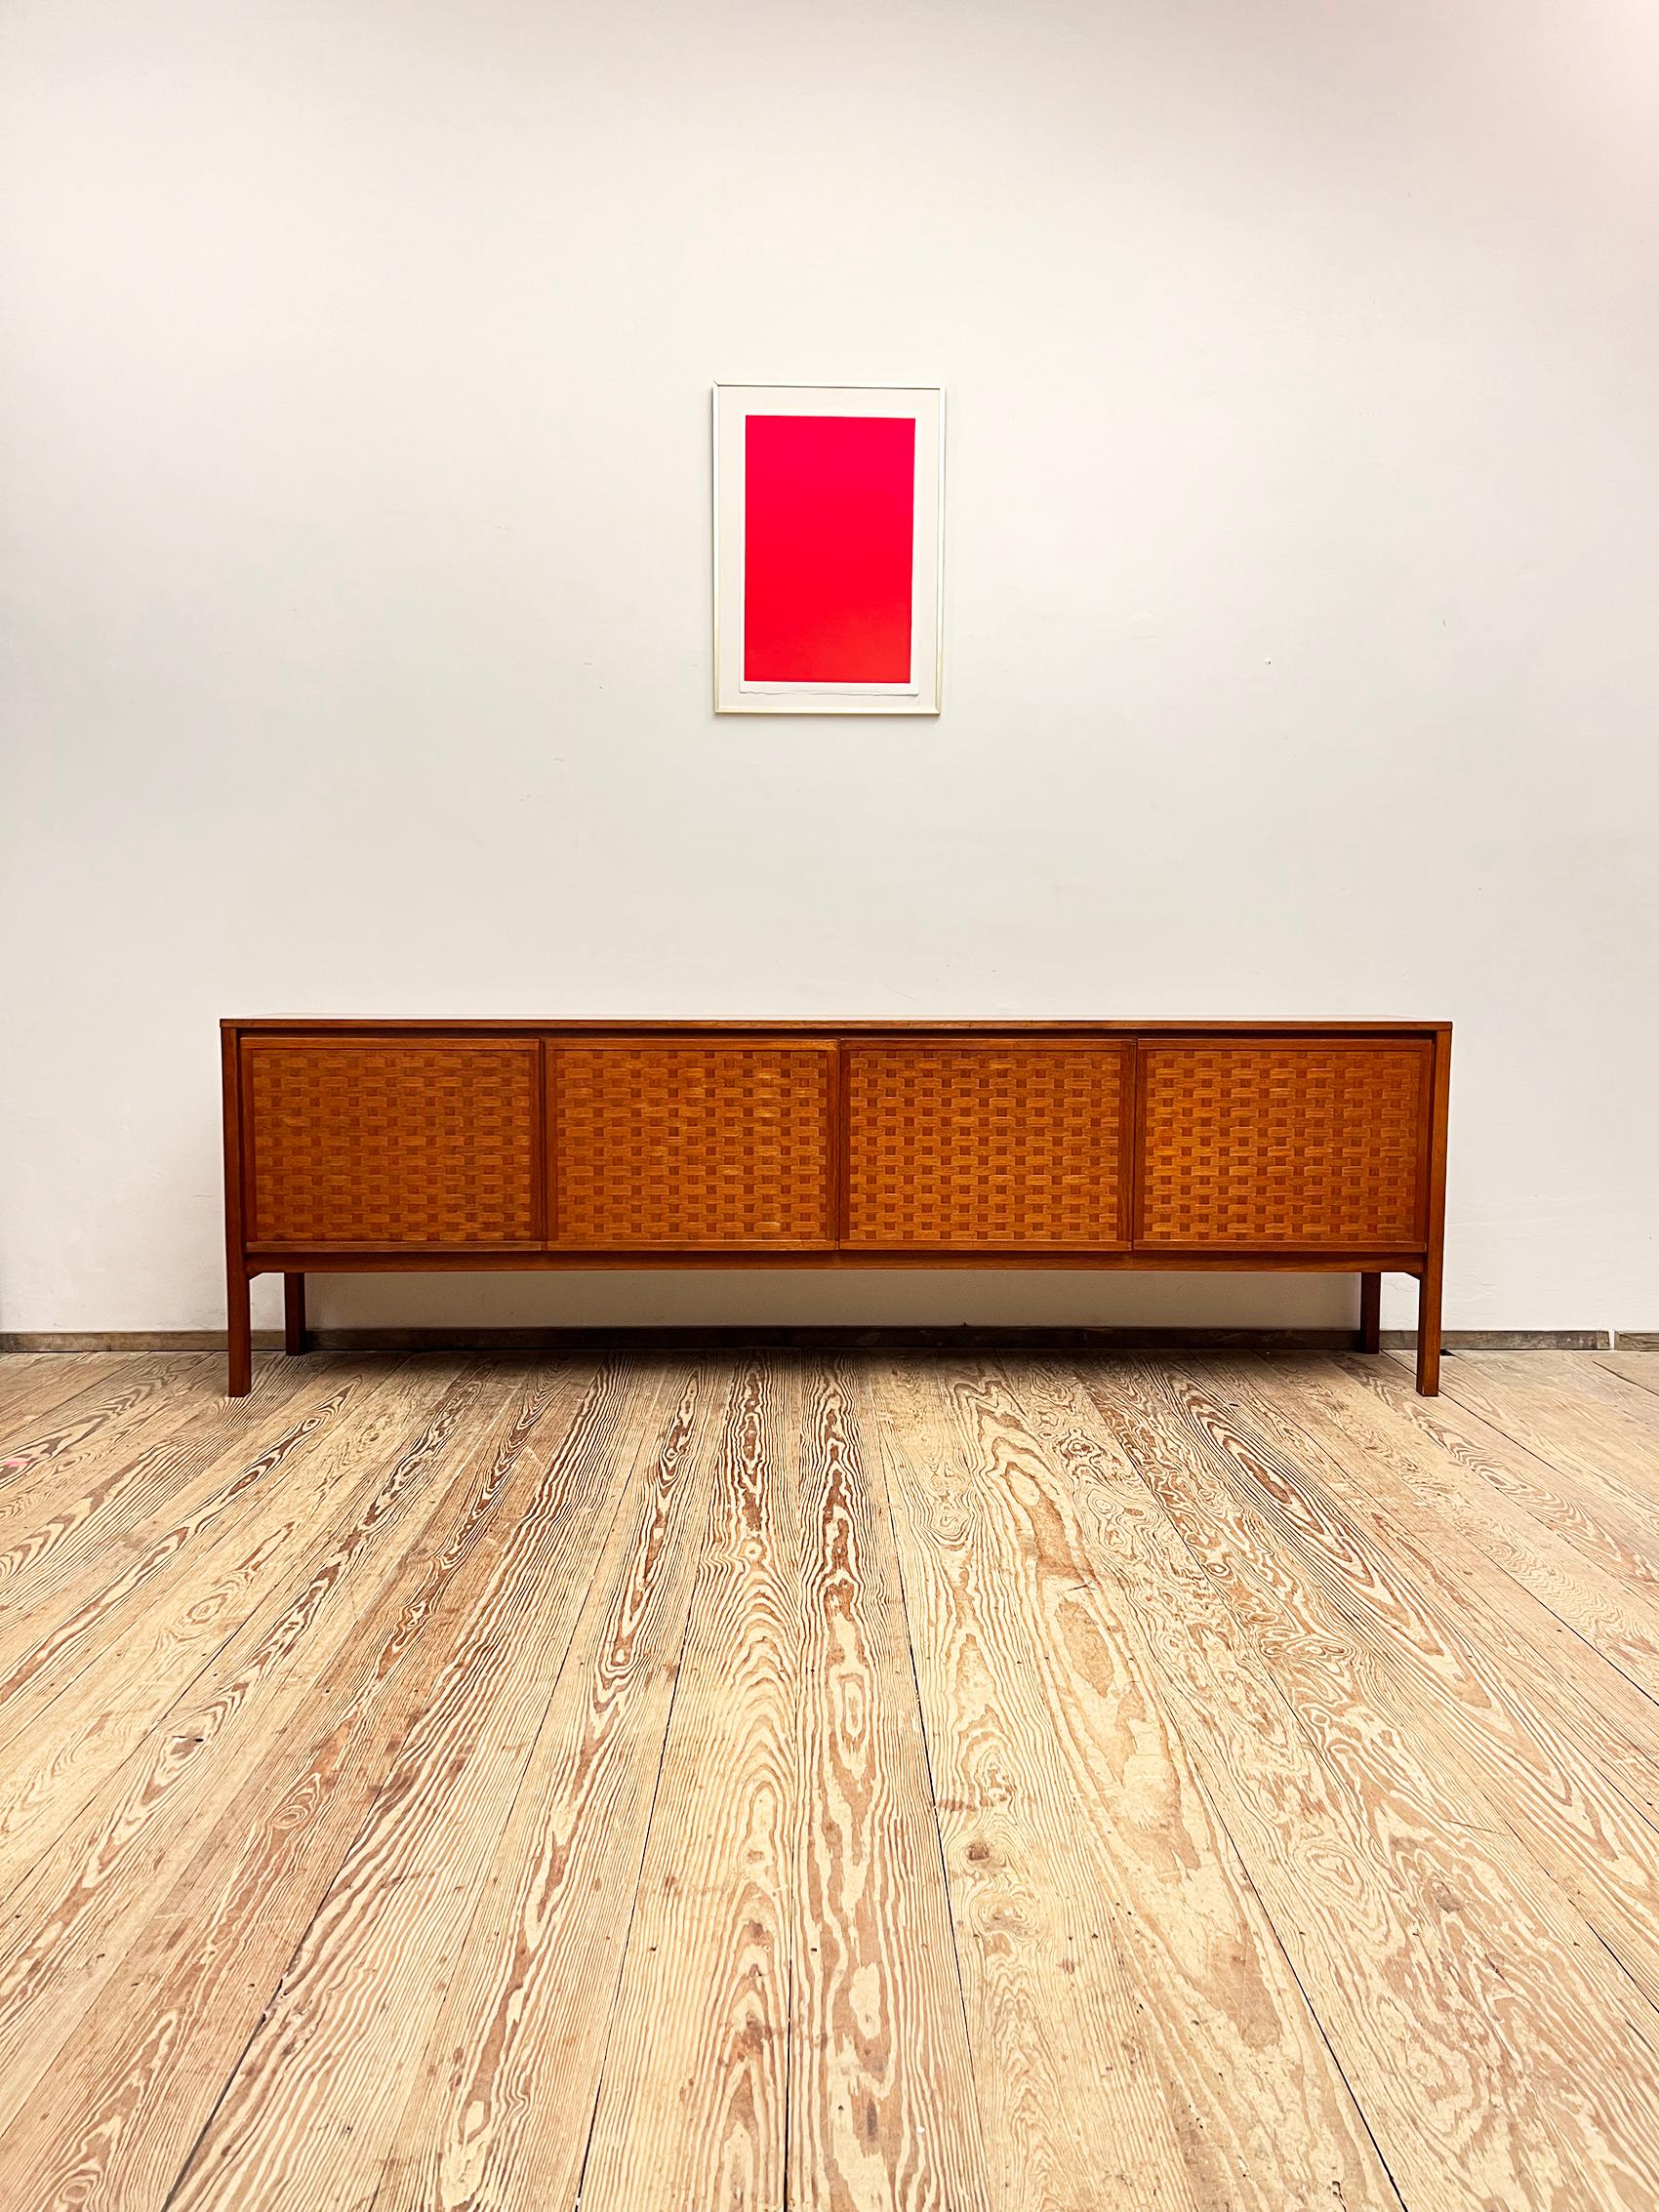 Dimensions (length x depth x height) 250 x 41 x 78,5 cm 

This very elegant large sideboard was designed in the 1960s by Leo Bub for Bub Wertmöbel, Germany. The mid-century modern credenza comes in a lovely teak wood finish 

and reduced,